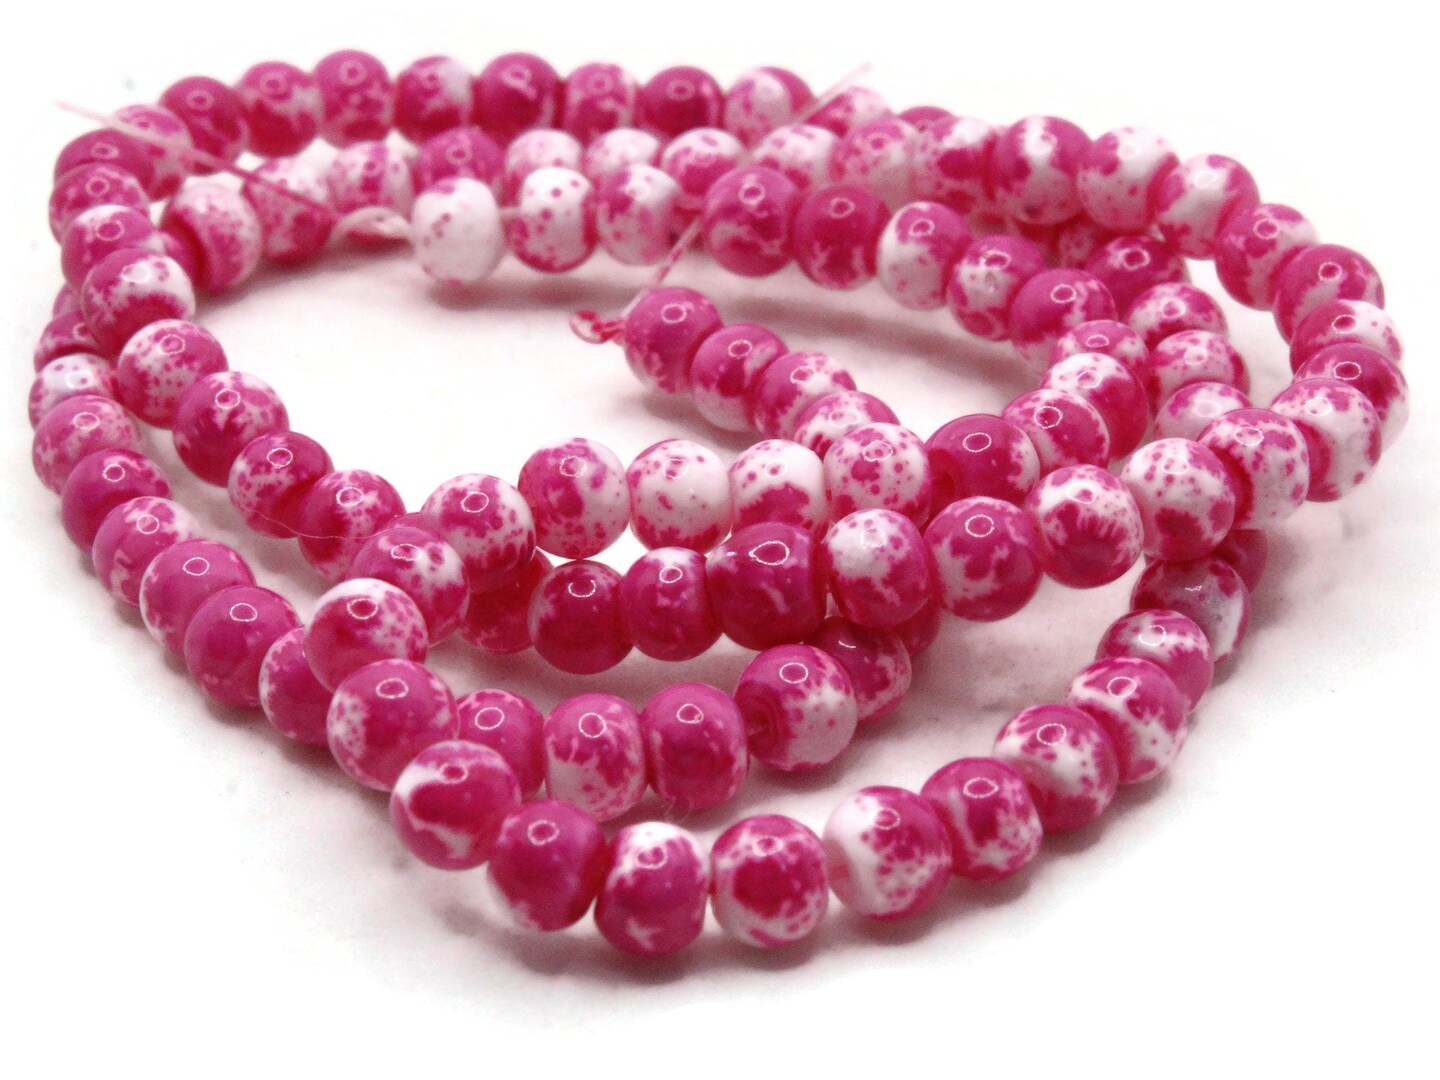 100 4mm White with Pink Splatter Paint Smooth Round Glass Beads